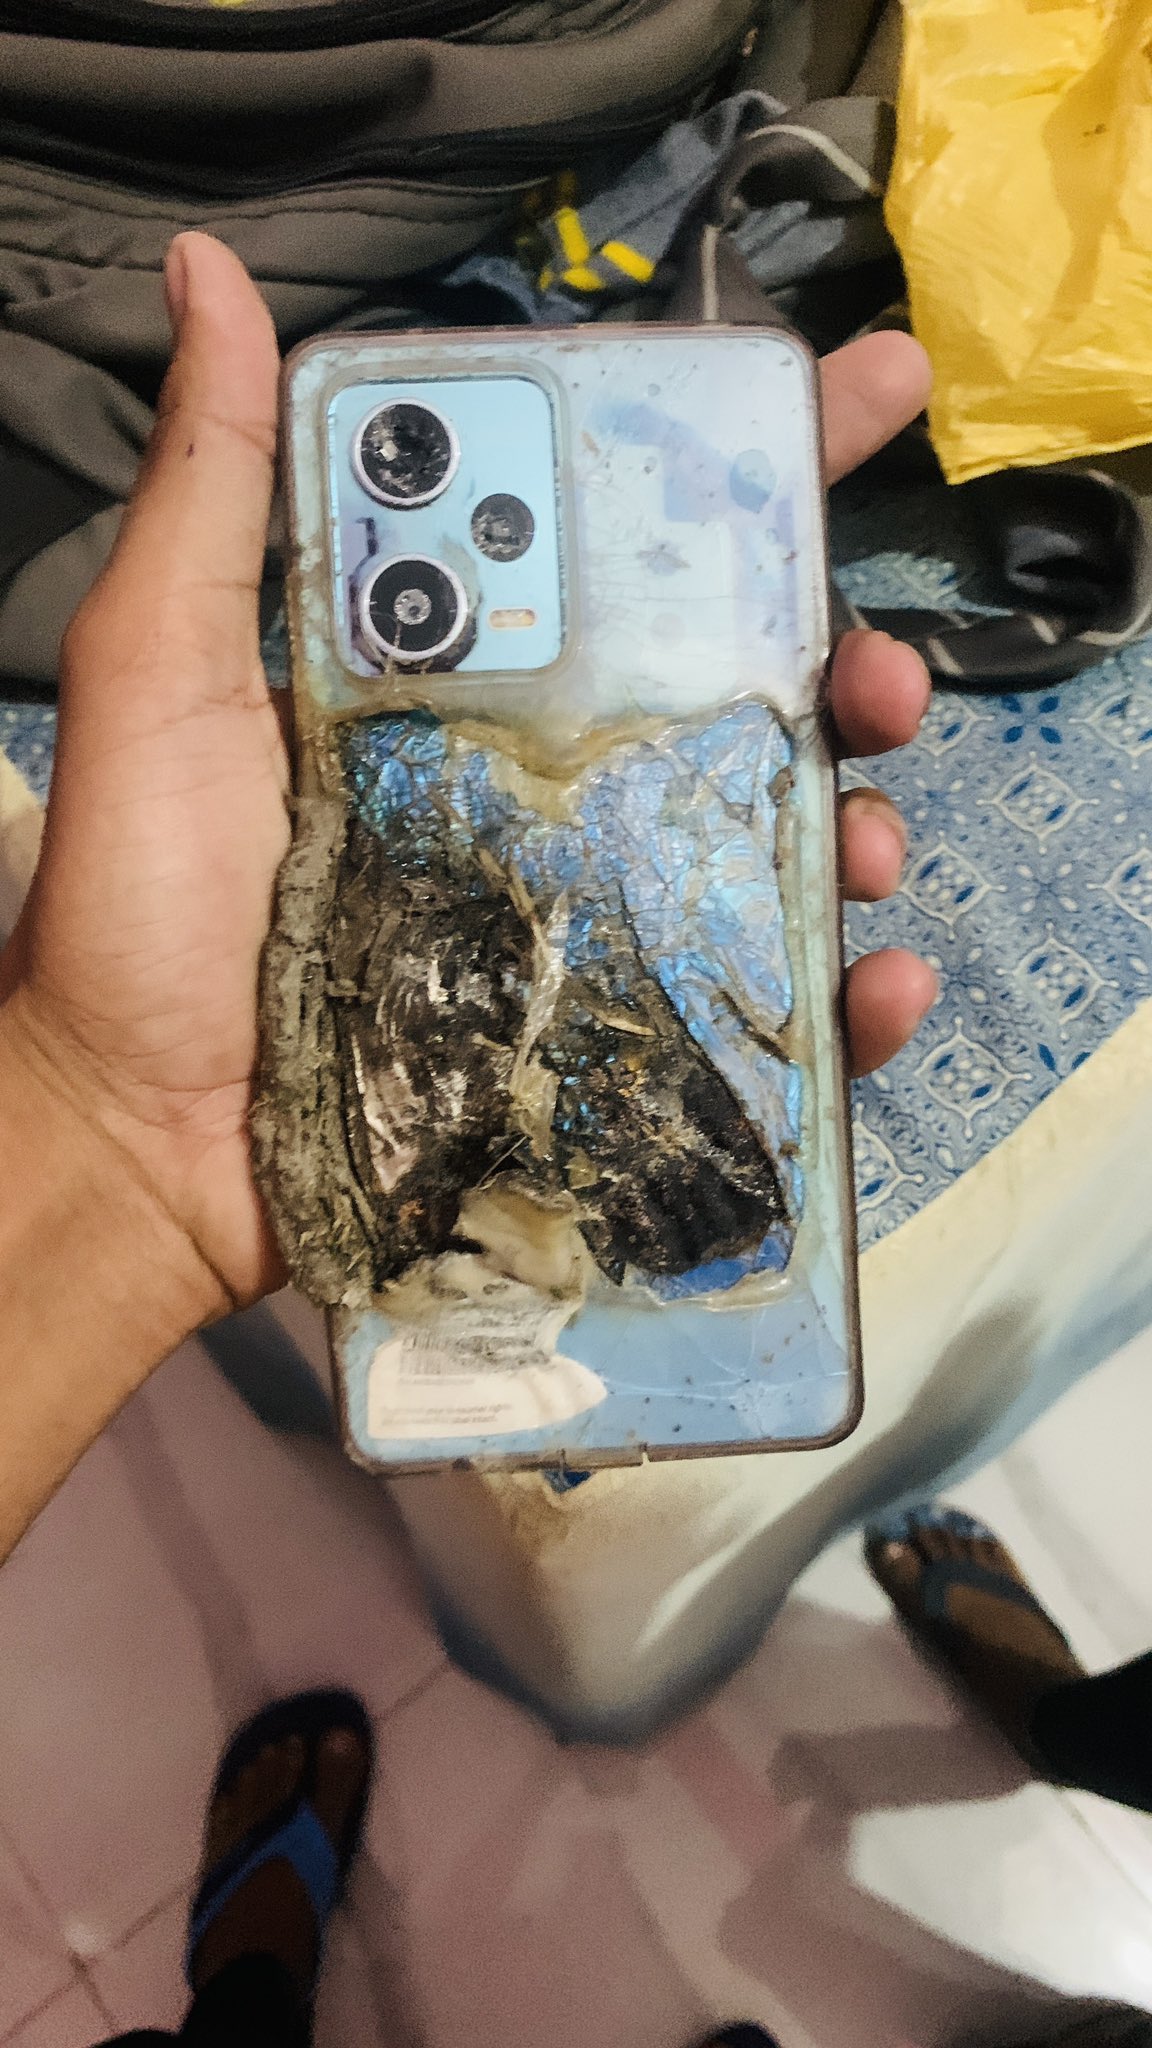 The brand new Redmi Note 12 Pro caught fire in the user’s breast pocket